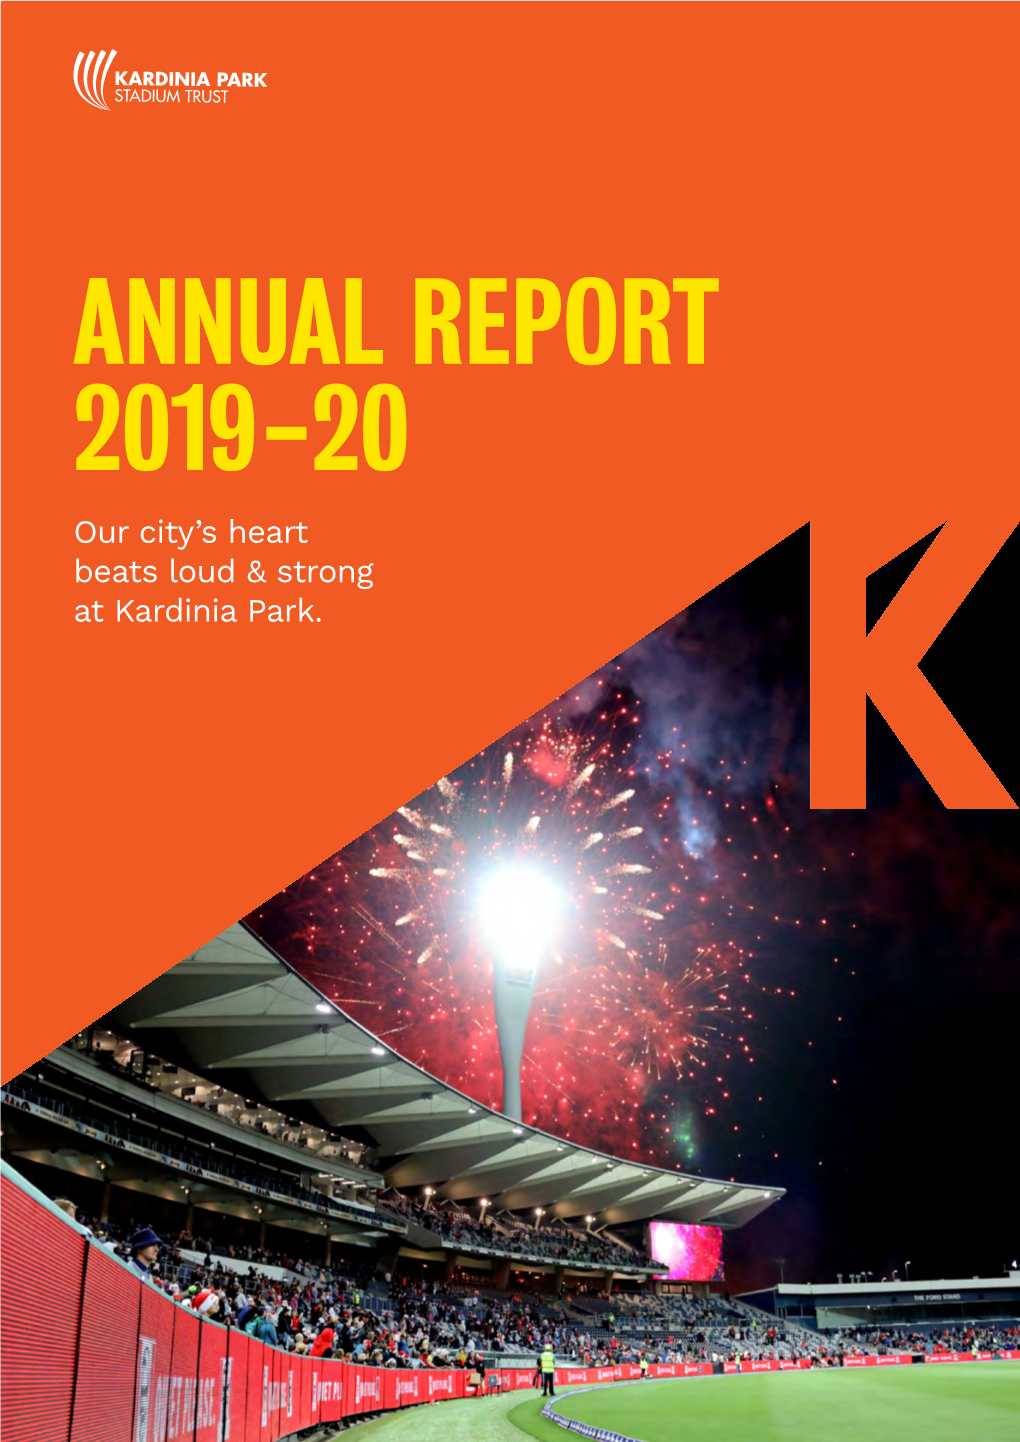 ANNUAL REPORT 2019-20 Our City’S Heart Beats Loud & Strong at Kardinia Park